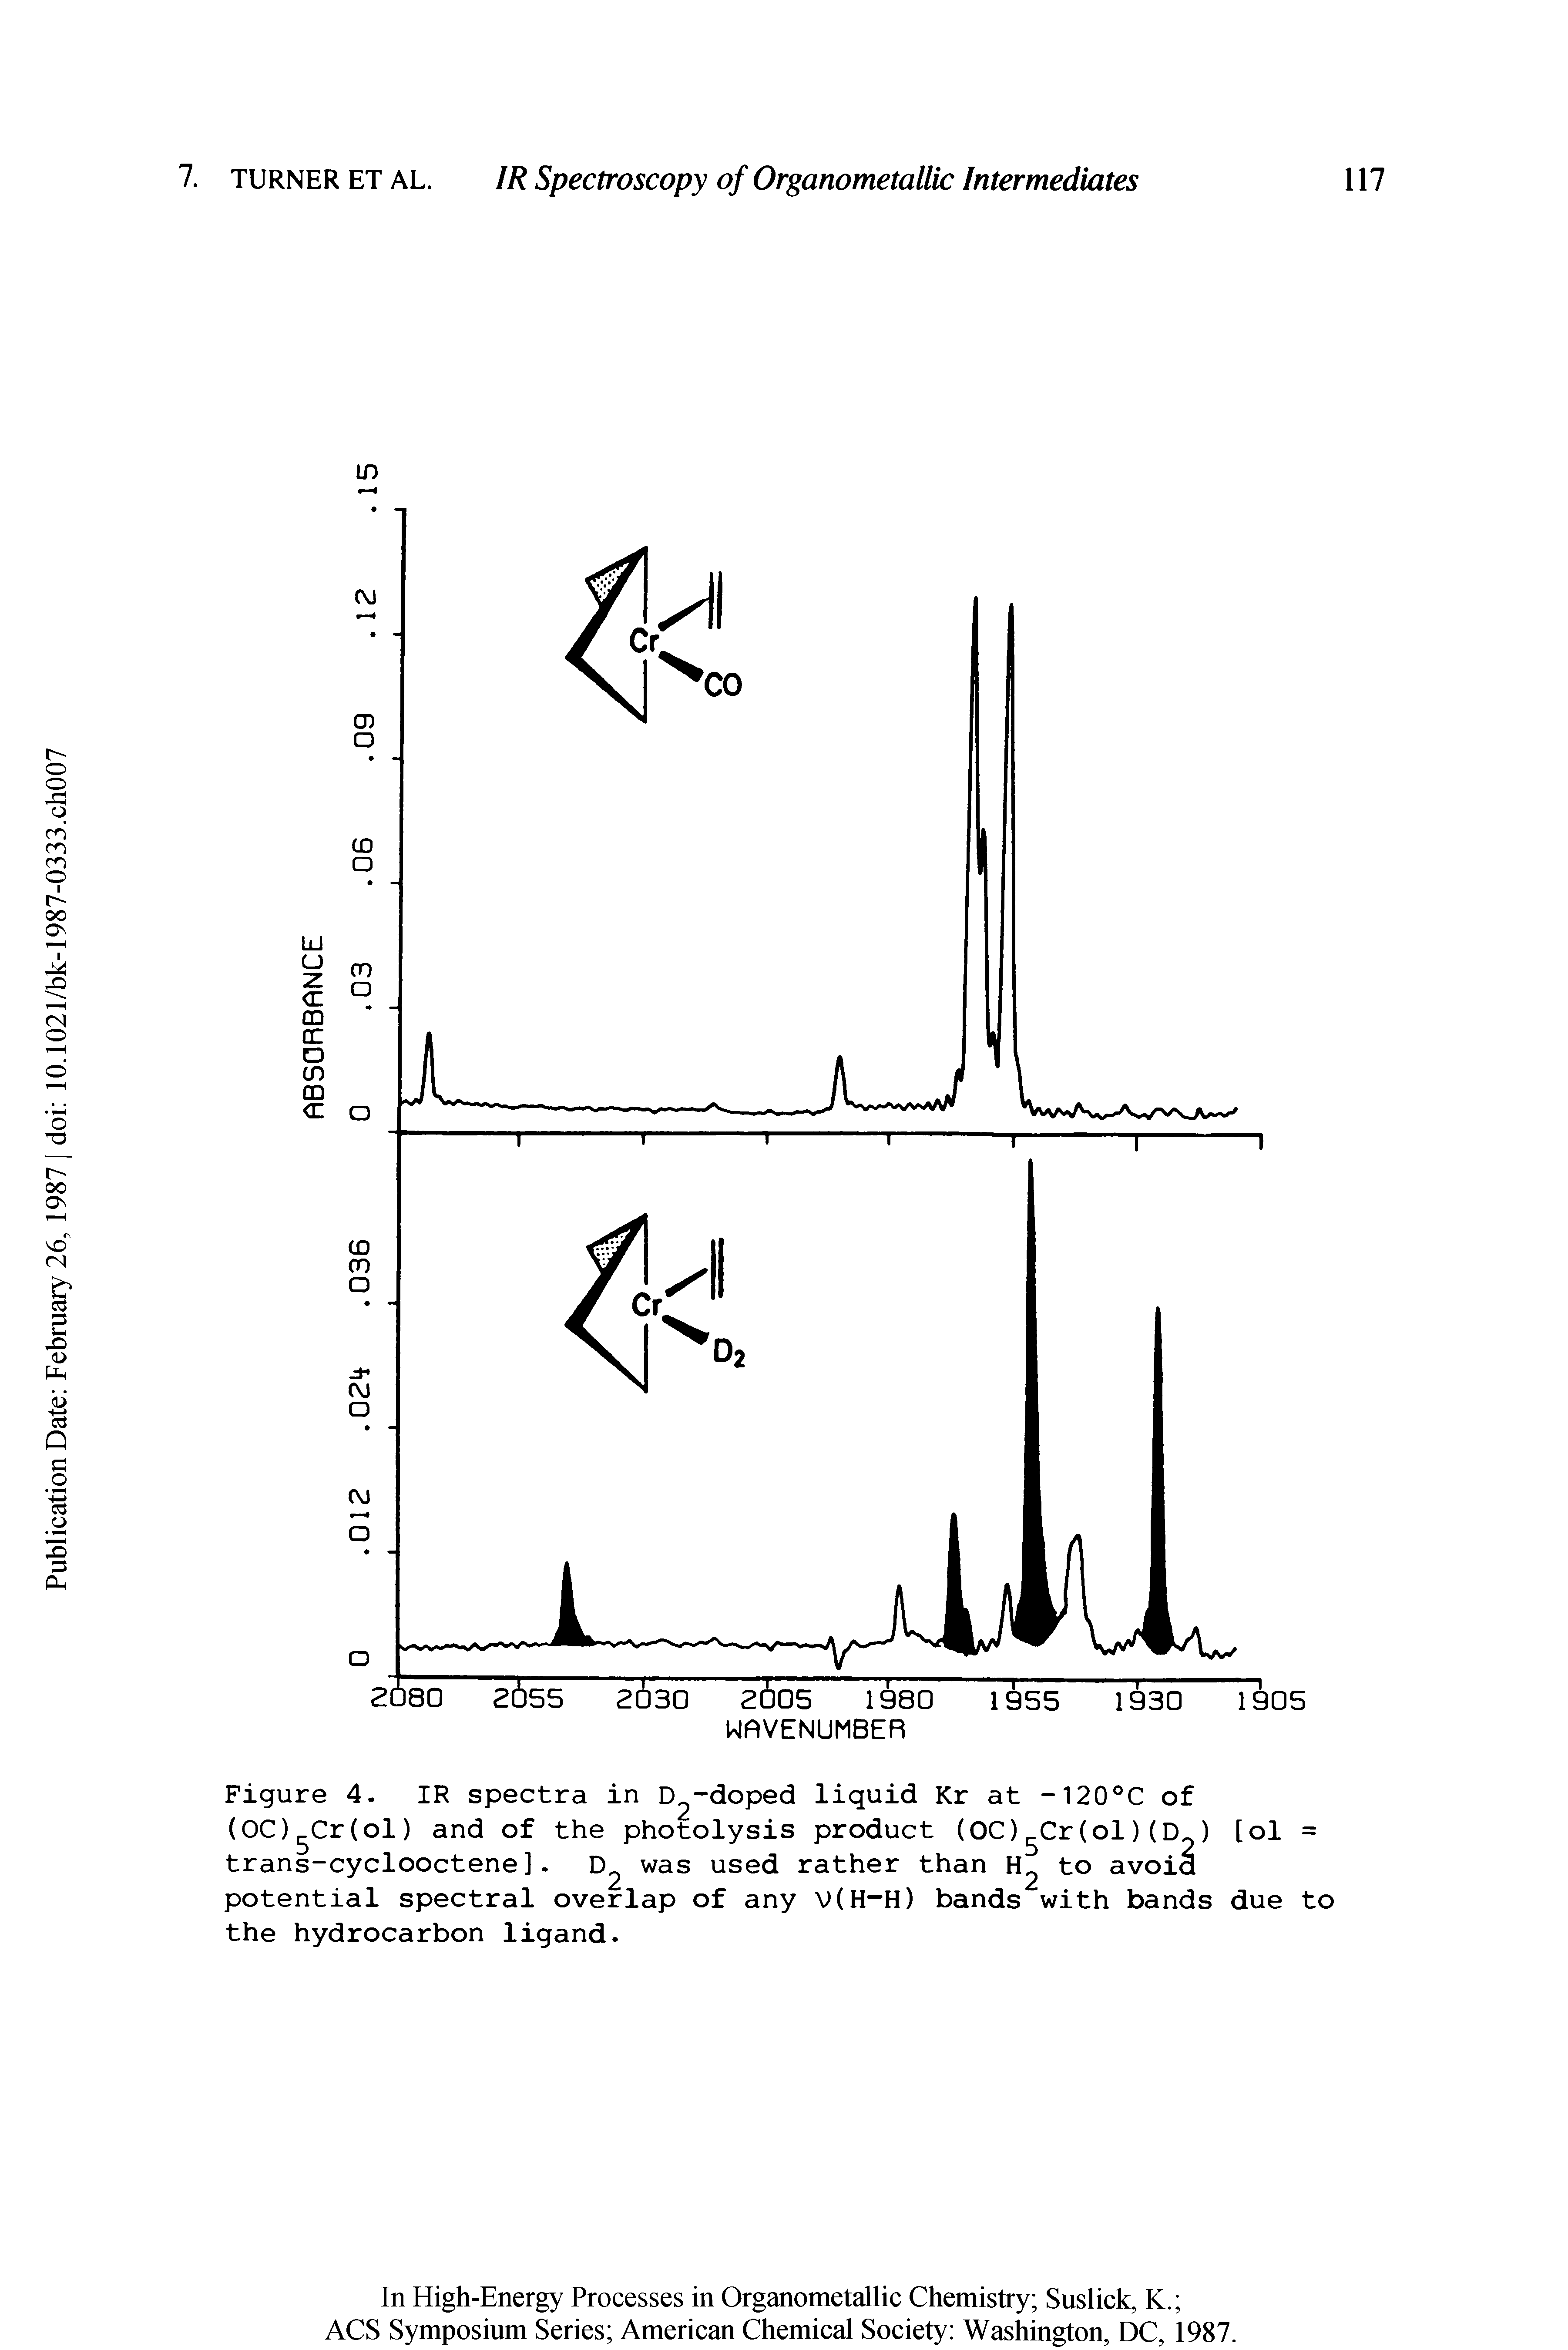 Figure 4. IR spectra in D -doped liquid Kr at -120°C of (OC) Cr(ol) and of the photolysis product (OC) Cr(ol)(D ) [ol = trans-cyclooctene]. D2 was used rather than H2 to avoid potential spectral overlap of any V(H-H) bands with bands due to the hydrocarbon ligand.